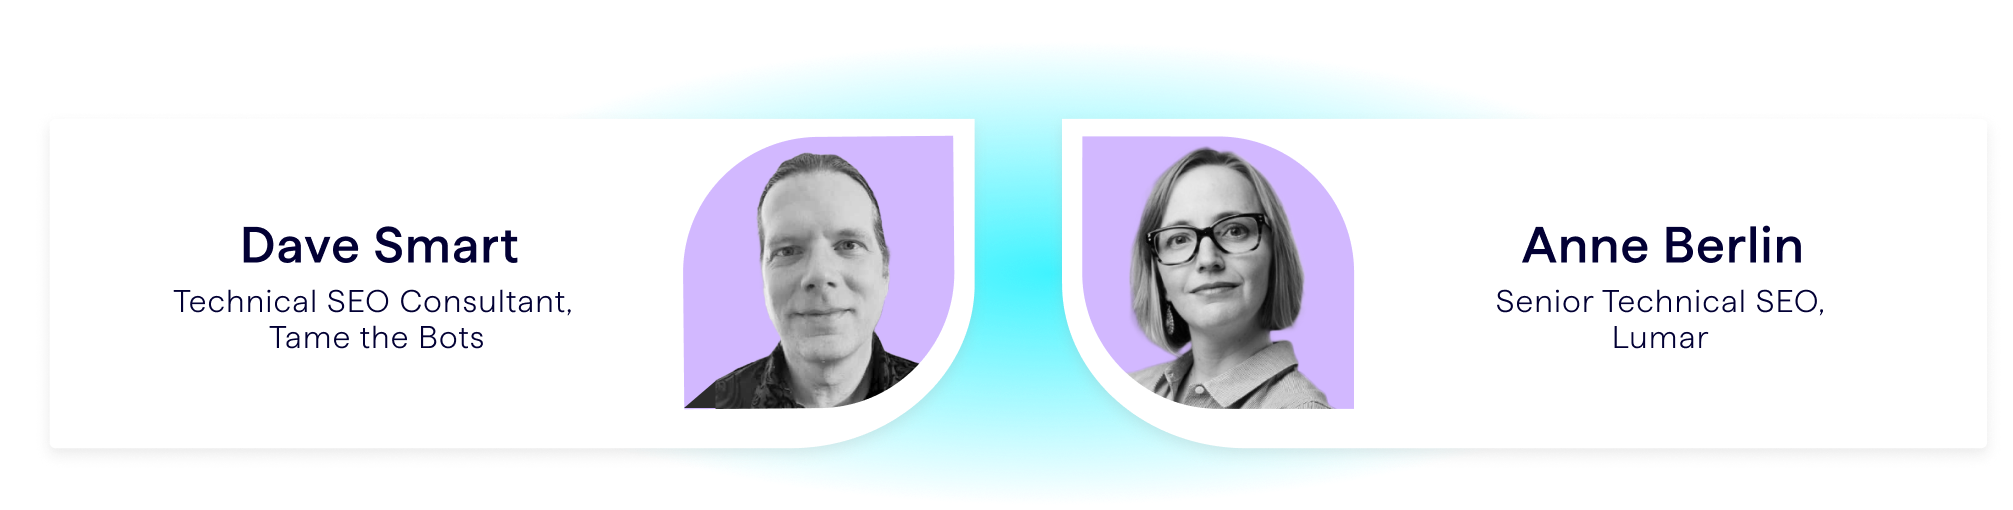 Banner showing 2 SEO expert speakers for webinar on Site Speed and SEO - 1) Dave Smart of Tame the Bots and 2) Anne Berlin, Senior Technical SEO at Lumar